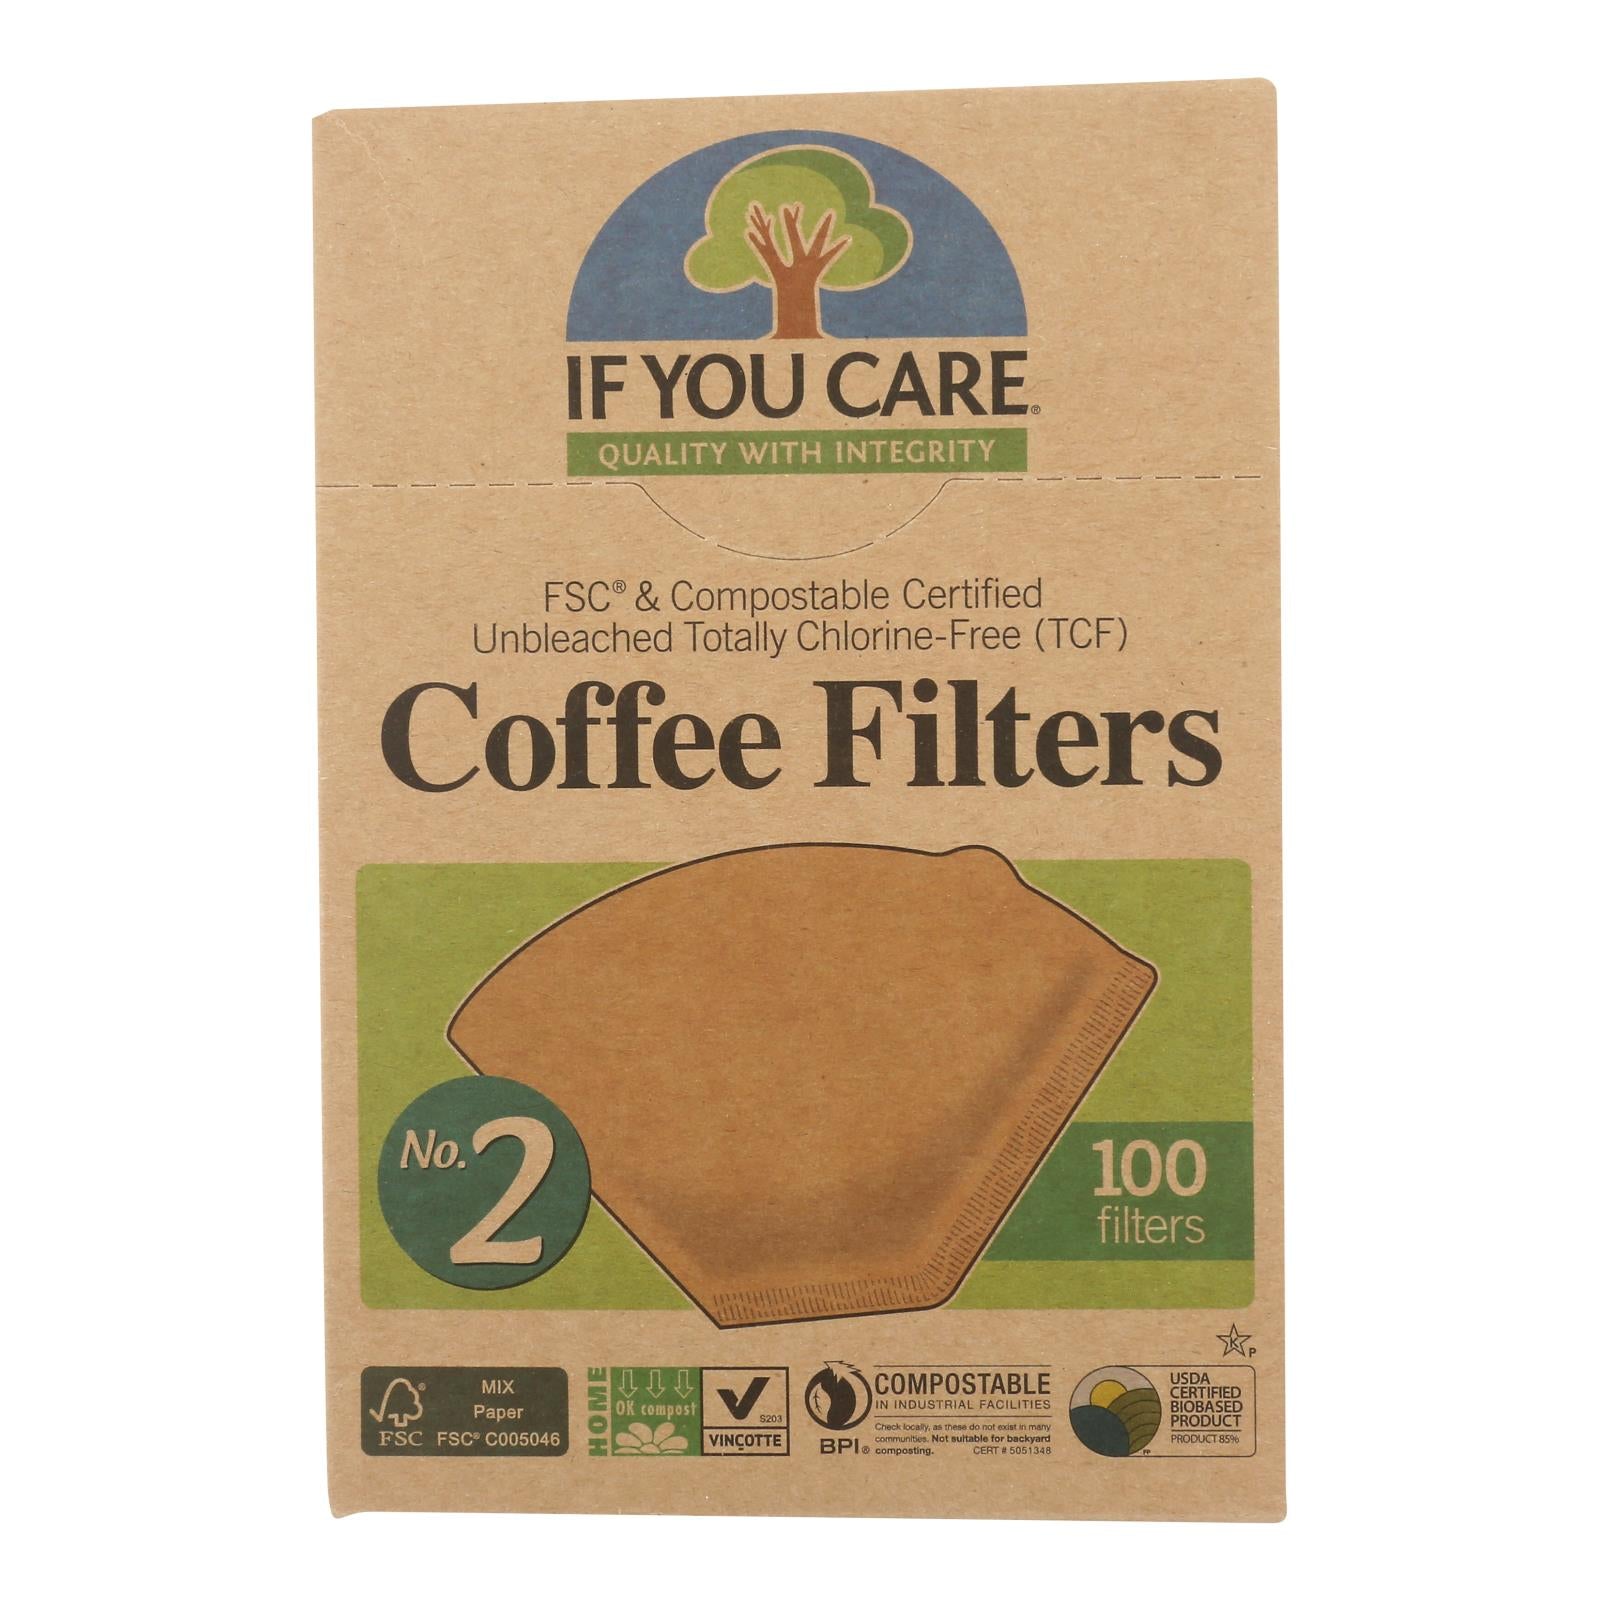 If You Care Coffee Filters Lbs.2 Cone - Case Of 12 - 100 Count